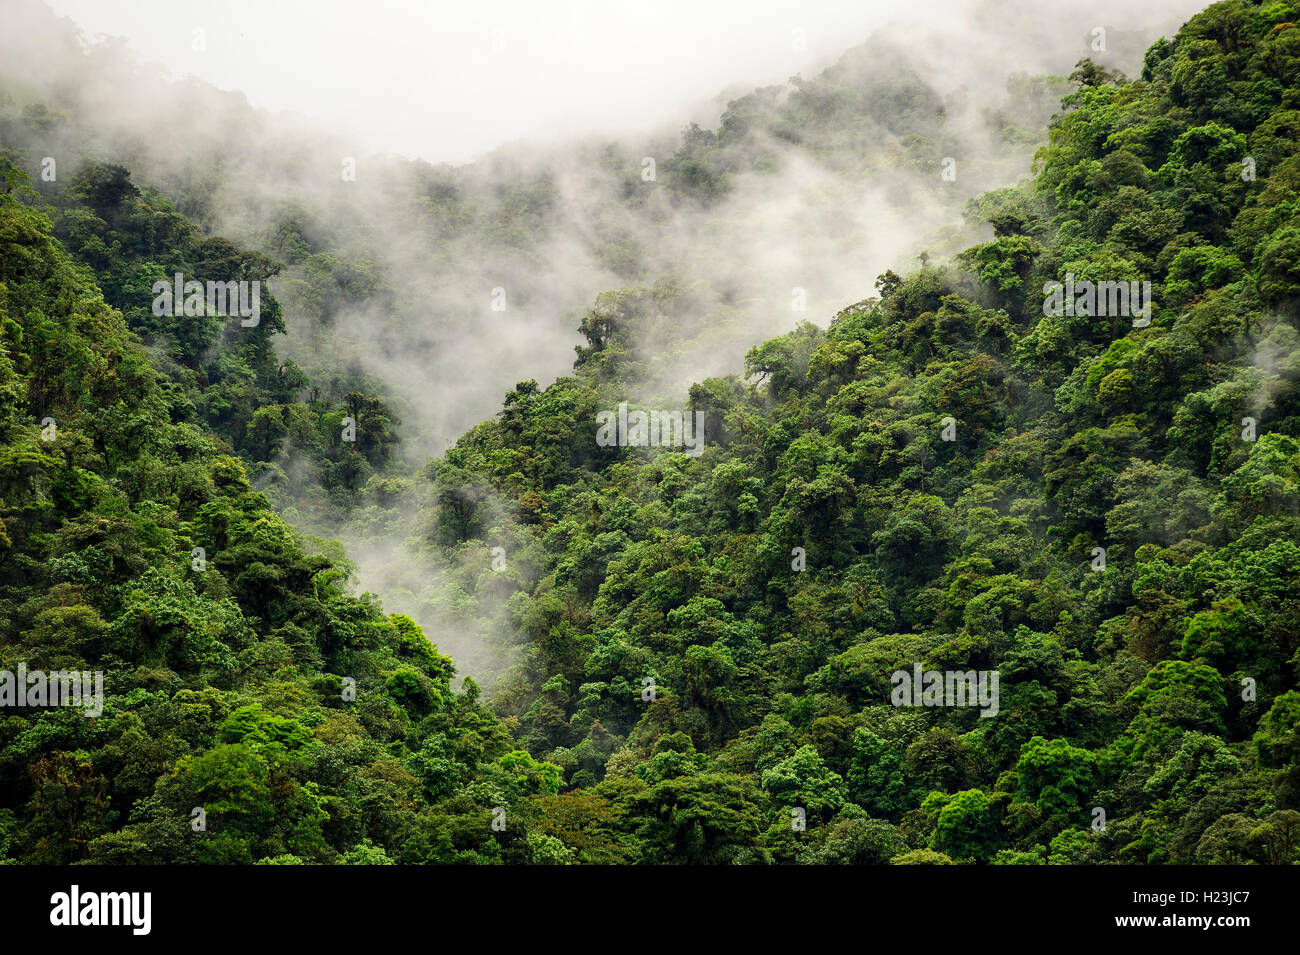 Thick rainforest, mist, cloud forest, Braulio Carrillo National Park, Costa Rica Stock Photo